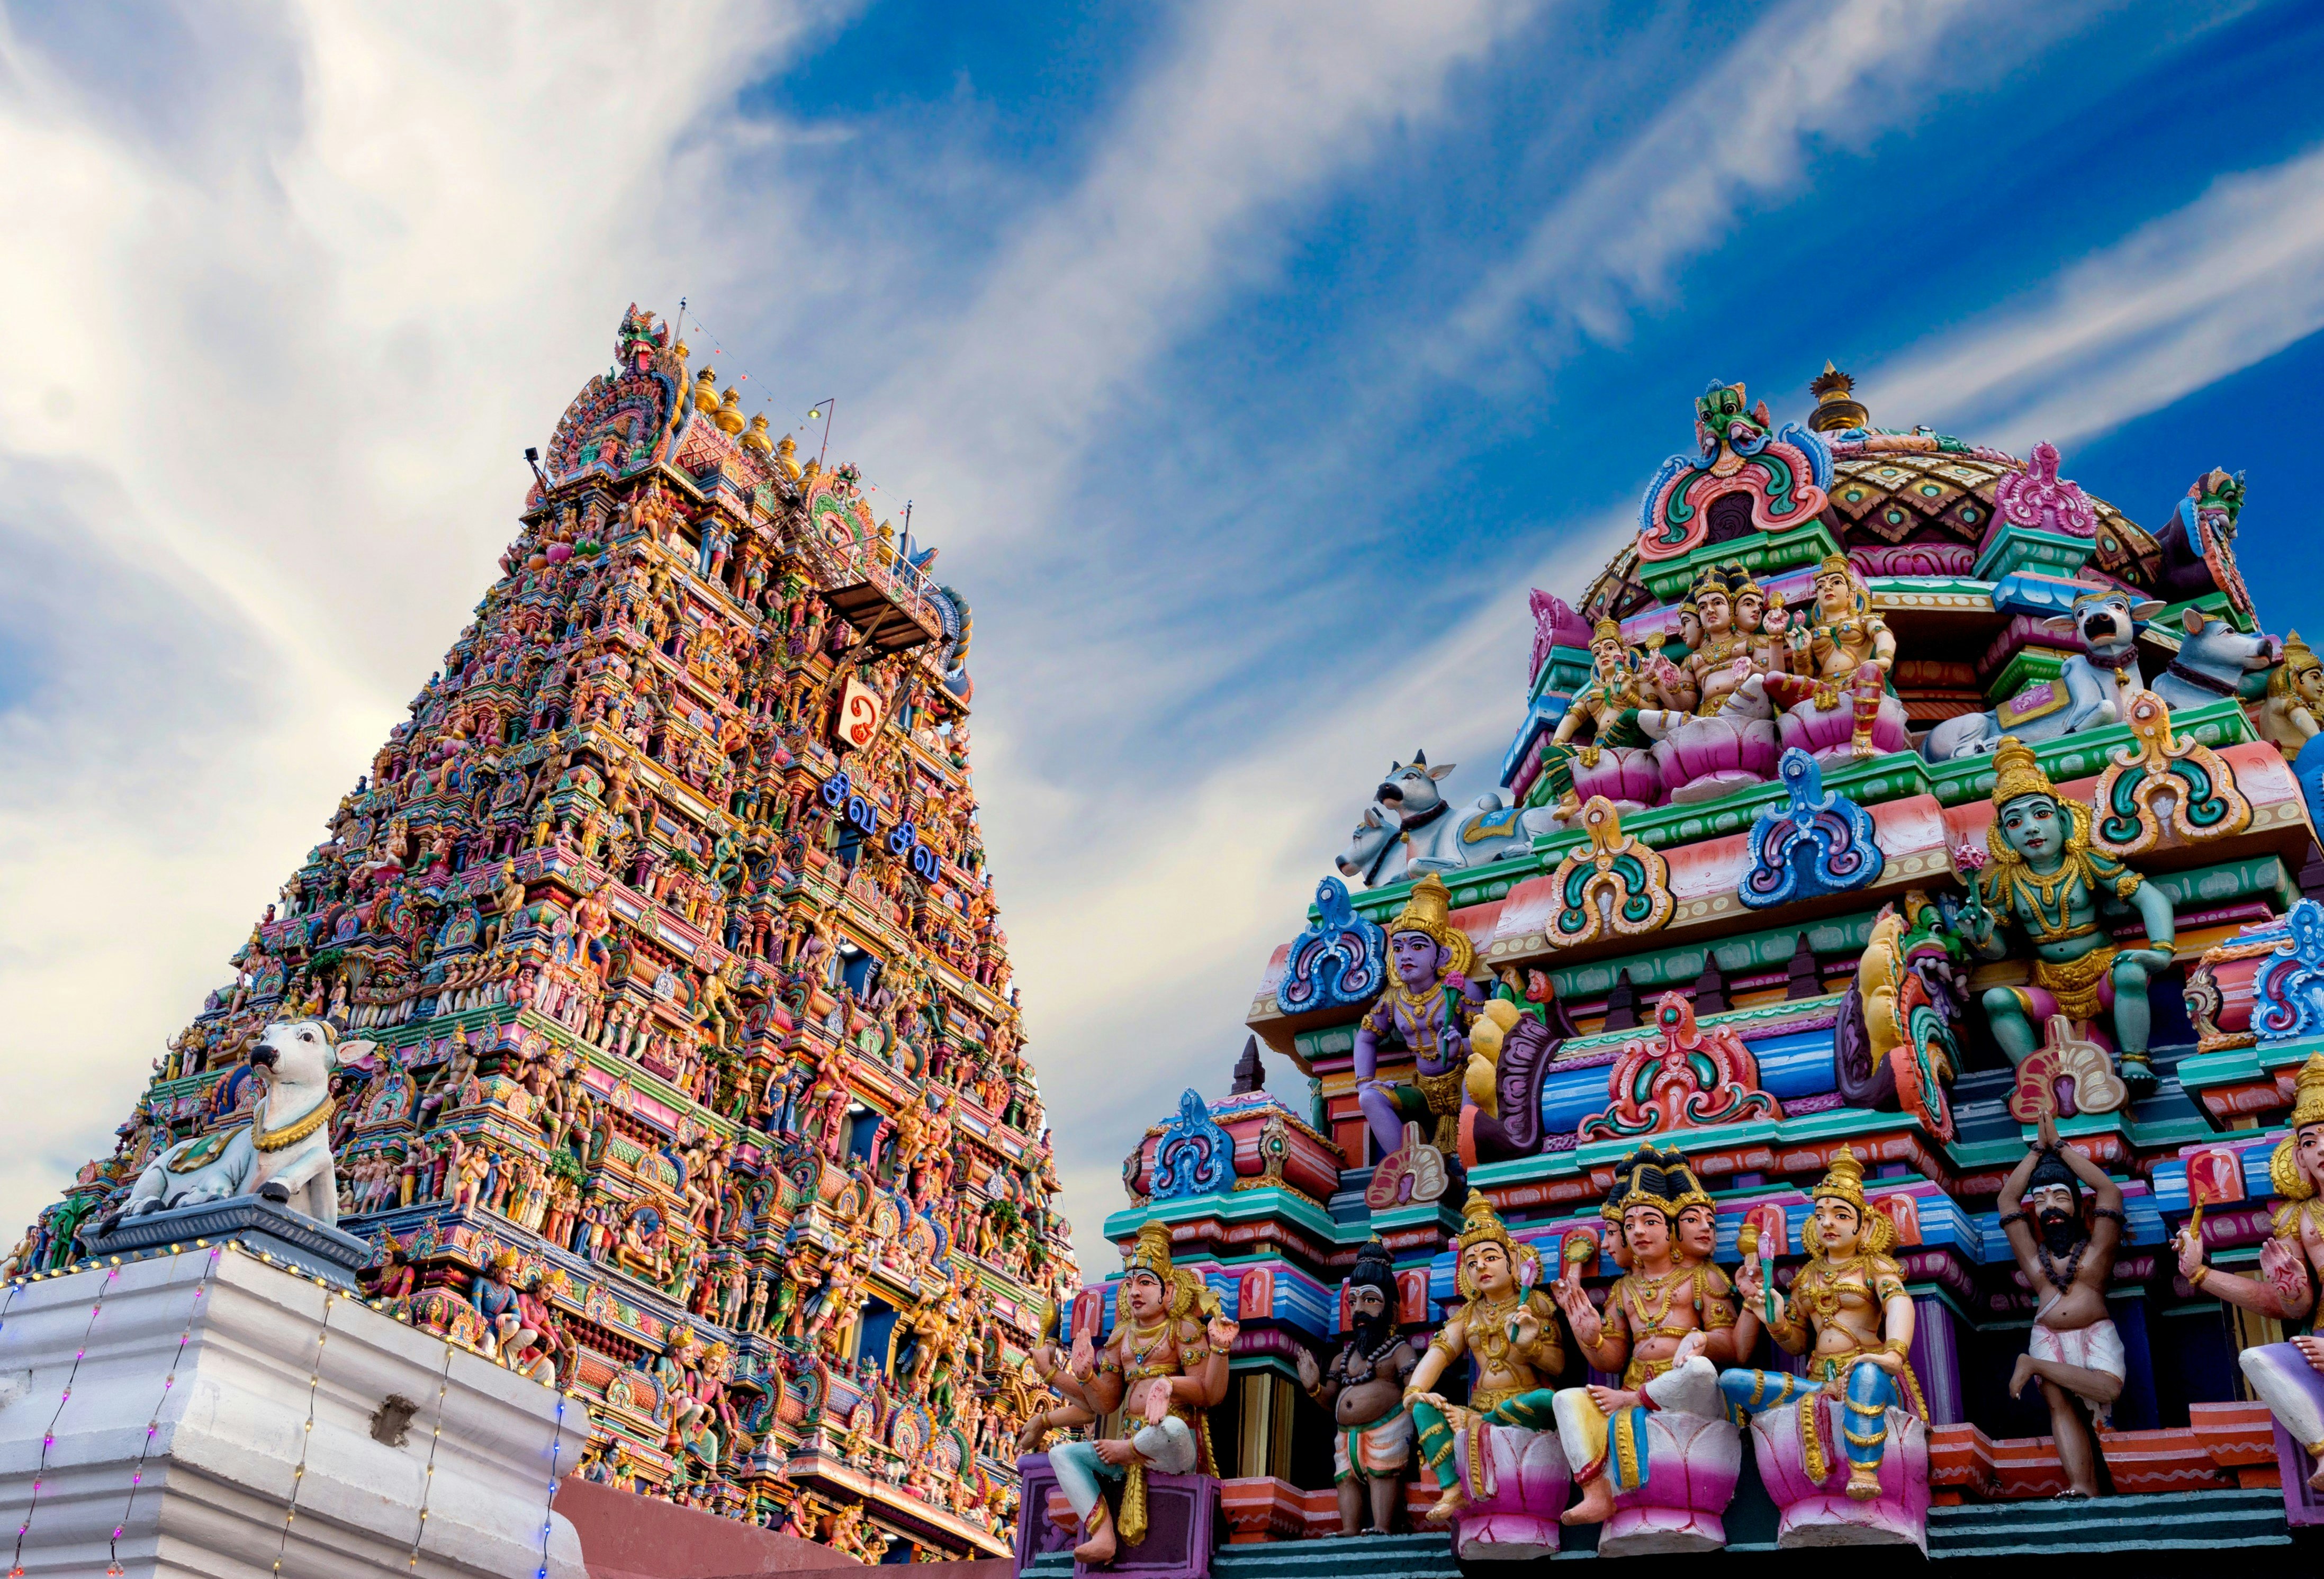 The eye-catching, colourful gopura at the Hindu Kapaleeshwarar Temple in Chennai. The temple's tower is covered in hundreds of sculptures of Hindu deities, all painted in bright colours.